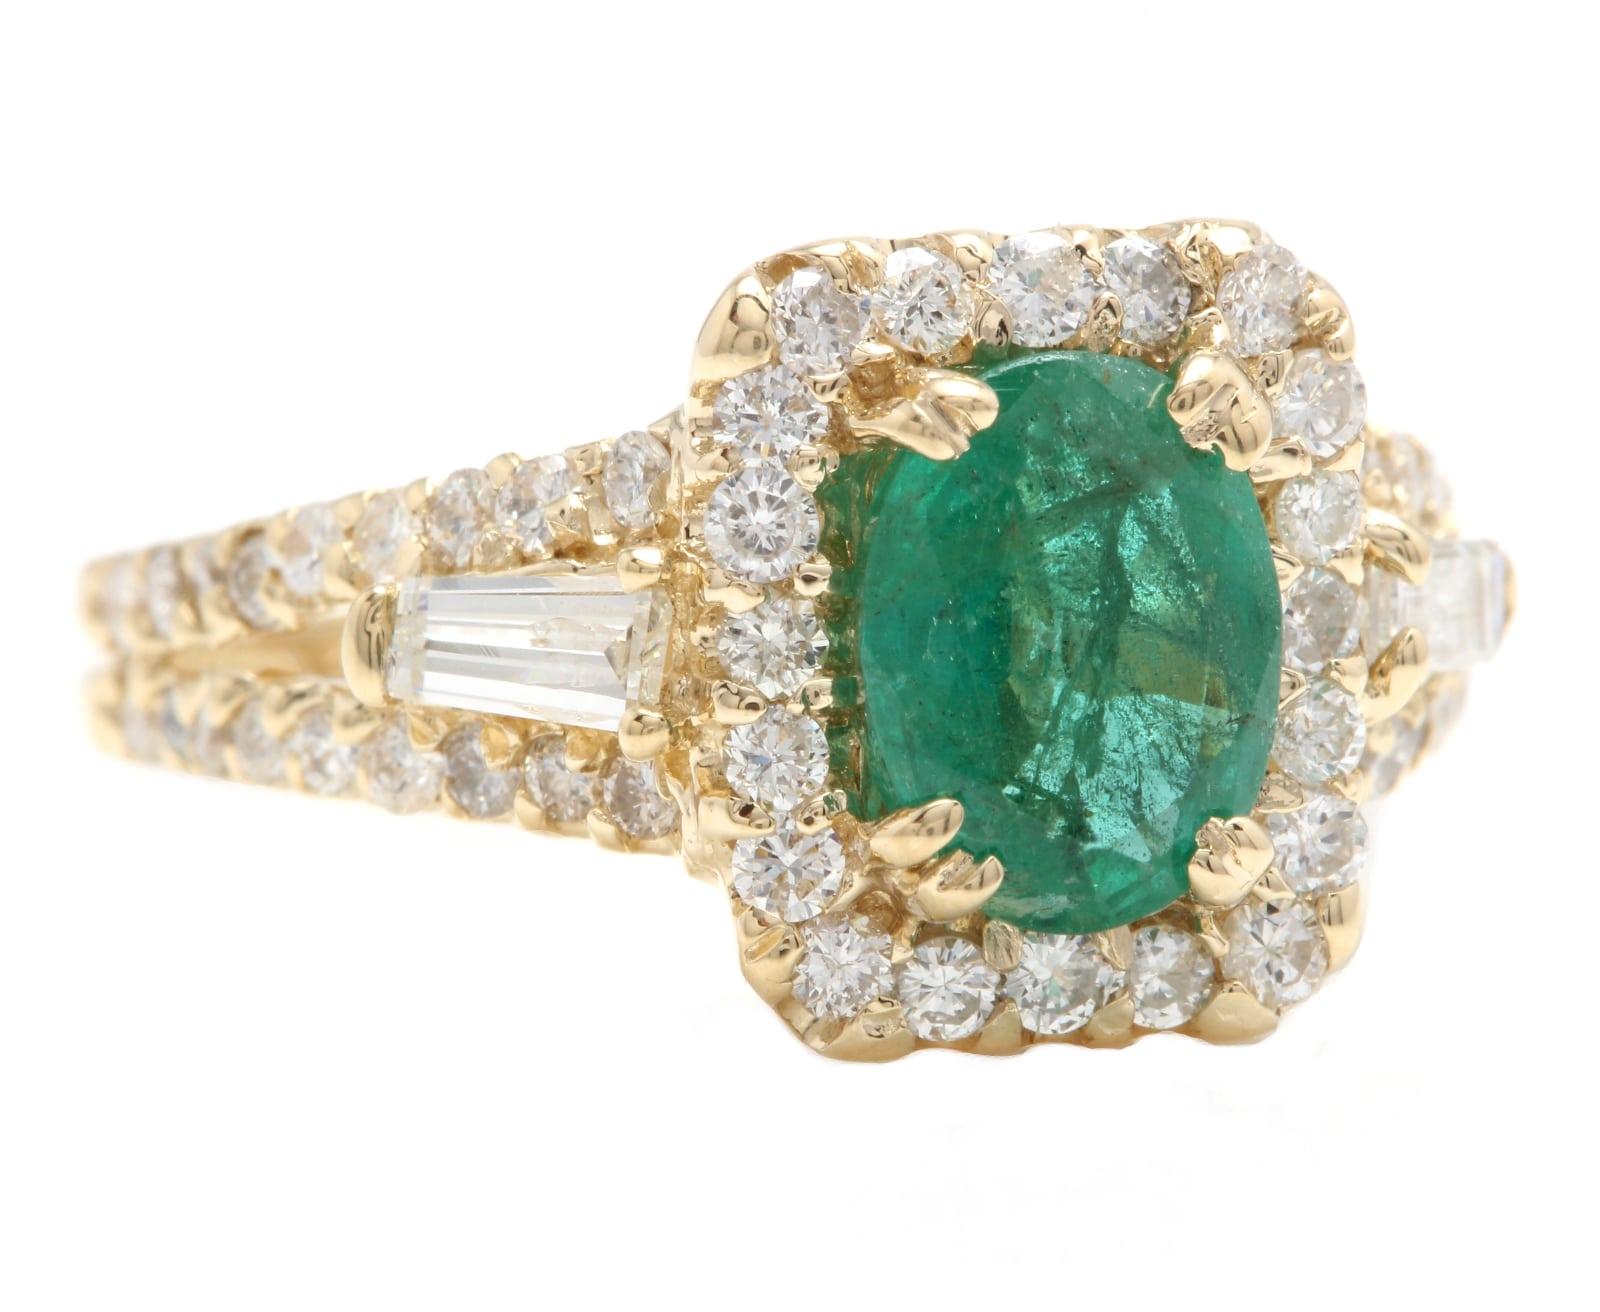 2.60 Carats Natural Emerald and Diamond 18K Solid Yellow Gold Ring

Suggested Replacement Value: Approx. $6,500.00

Total Natural Green Emerald Weight is: Approx. 1.60 Carats (transparent)

Emerald Measures: Approx. 8 x 6mm

Emerald Treatment: